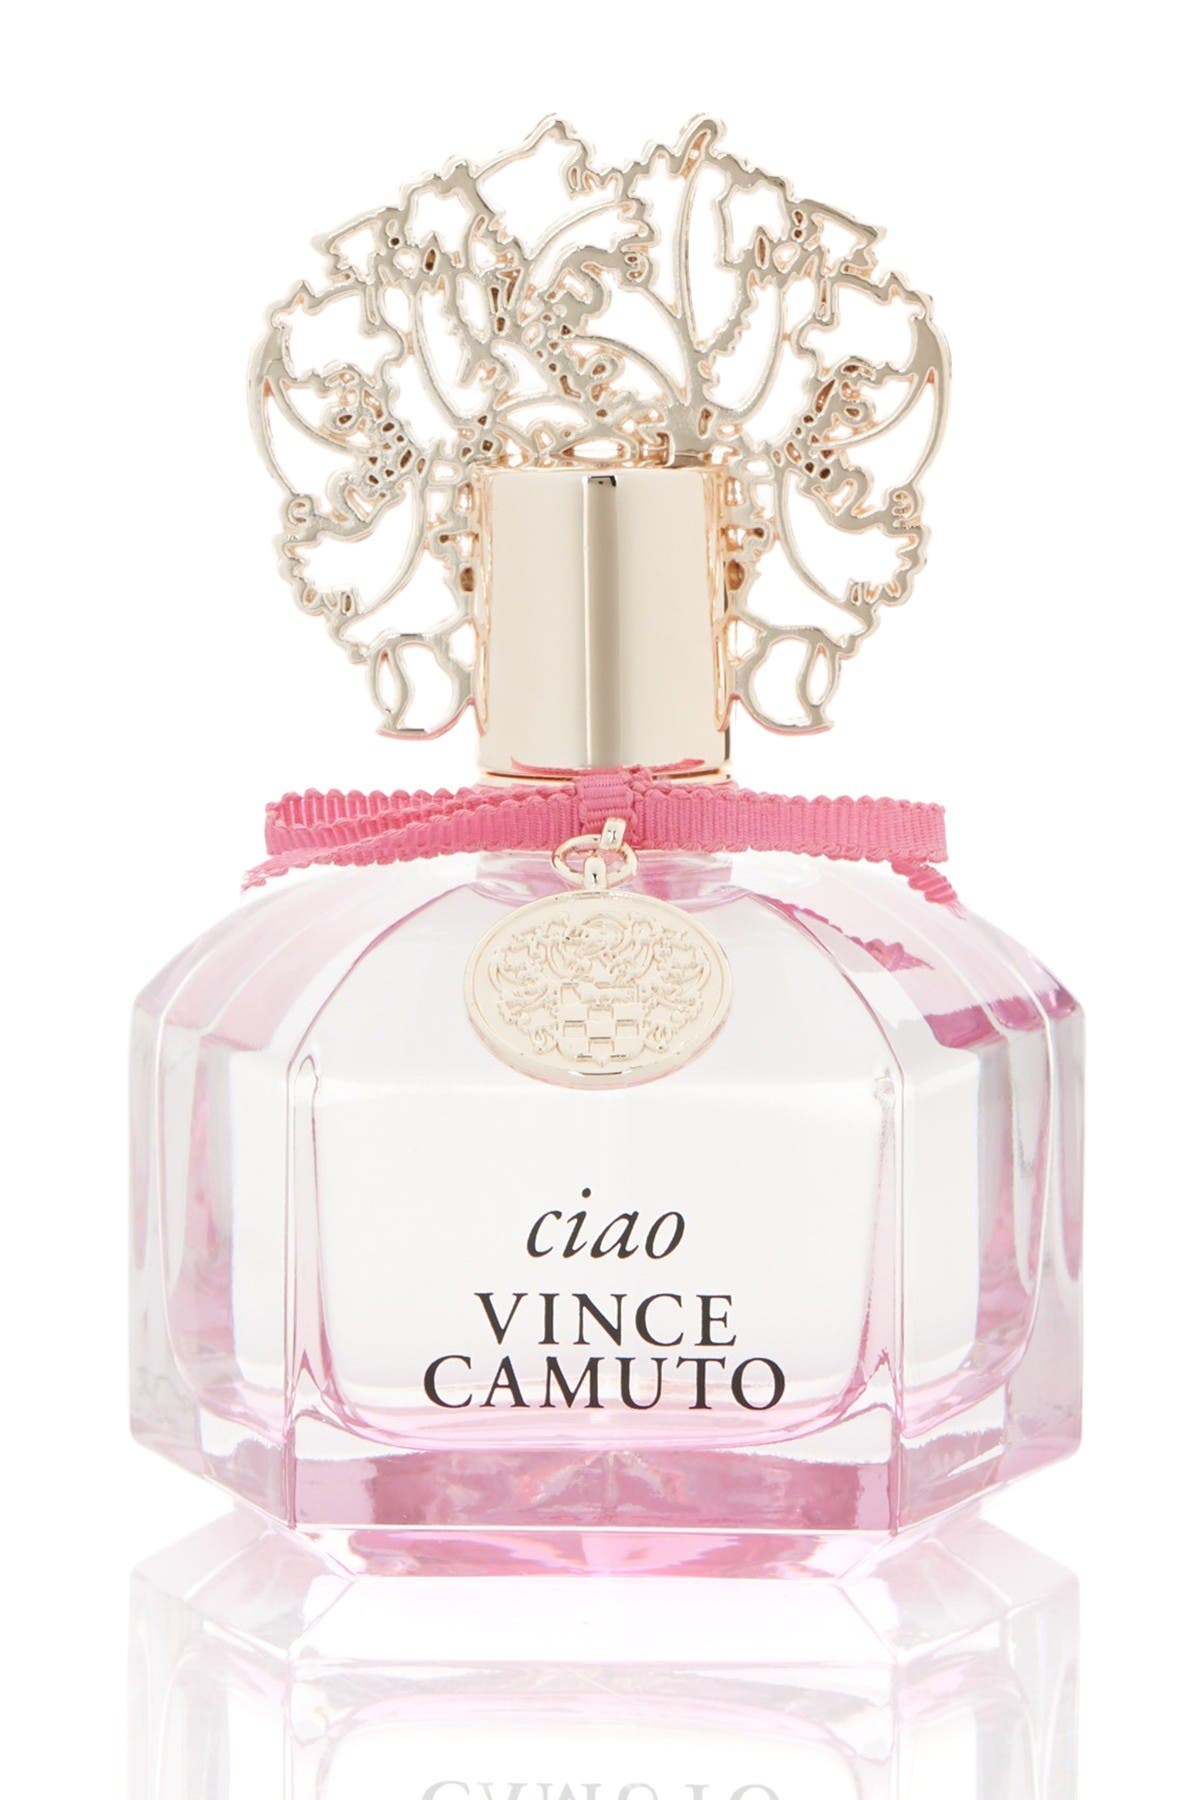 Vince Camuto Ciao by Vince Camuto 1.0 FL OZ EDP Spray Perfume Women New In  Box